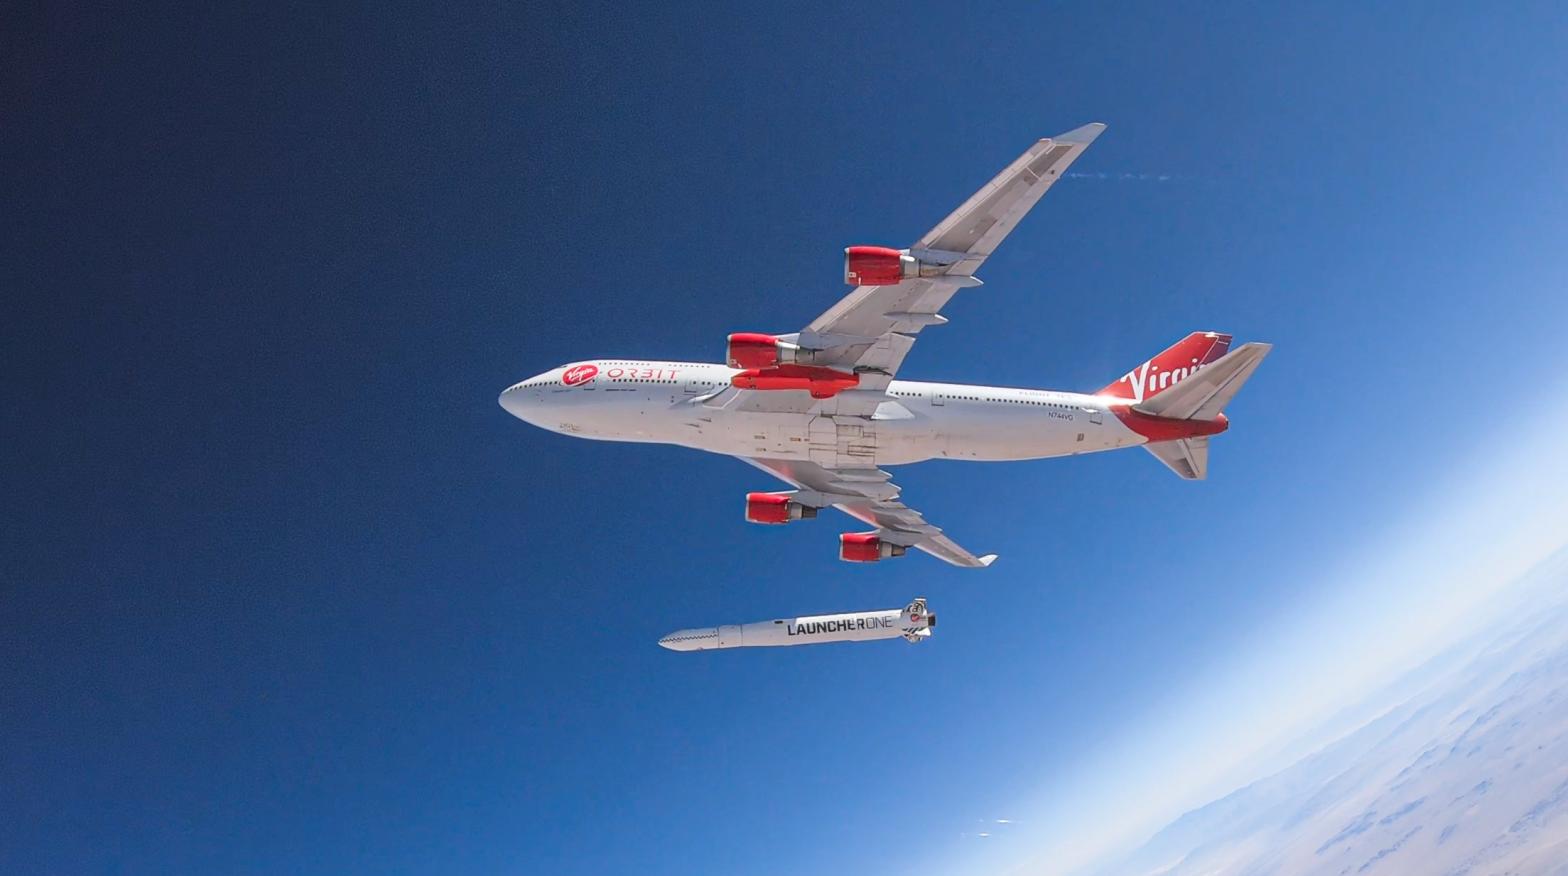 Release of the LauncherOne rocket from a Boeing 747 during a July 2019 drop test. (Photo: Virgin Orbit)